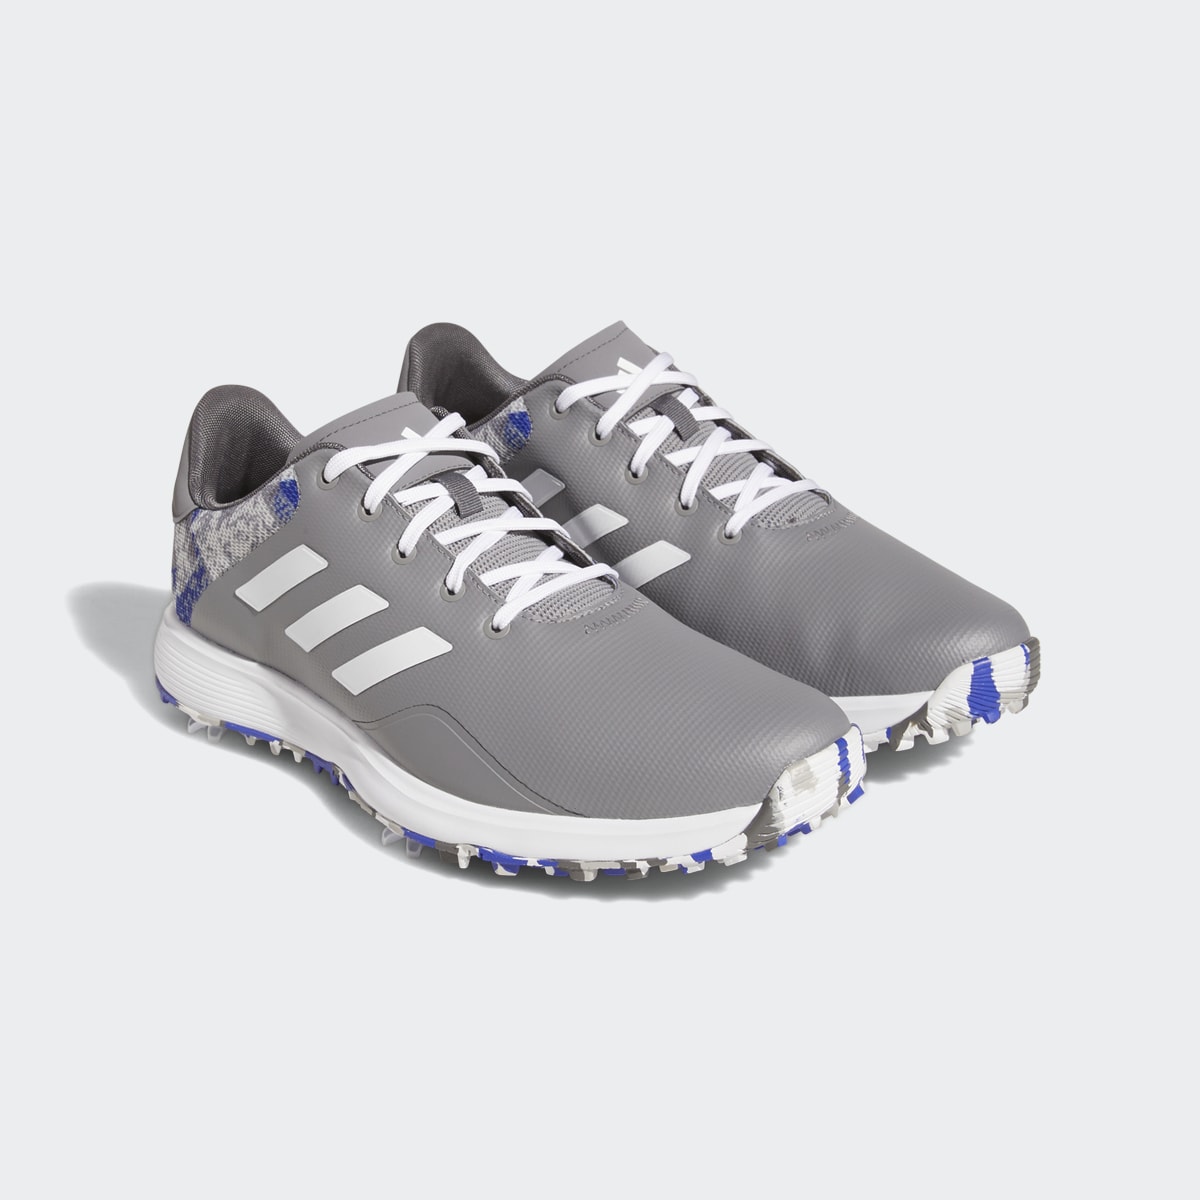 Adidas S2G Golf Shoes. 8